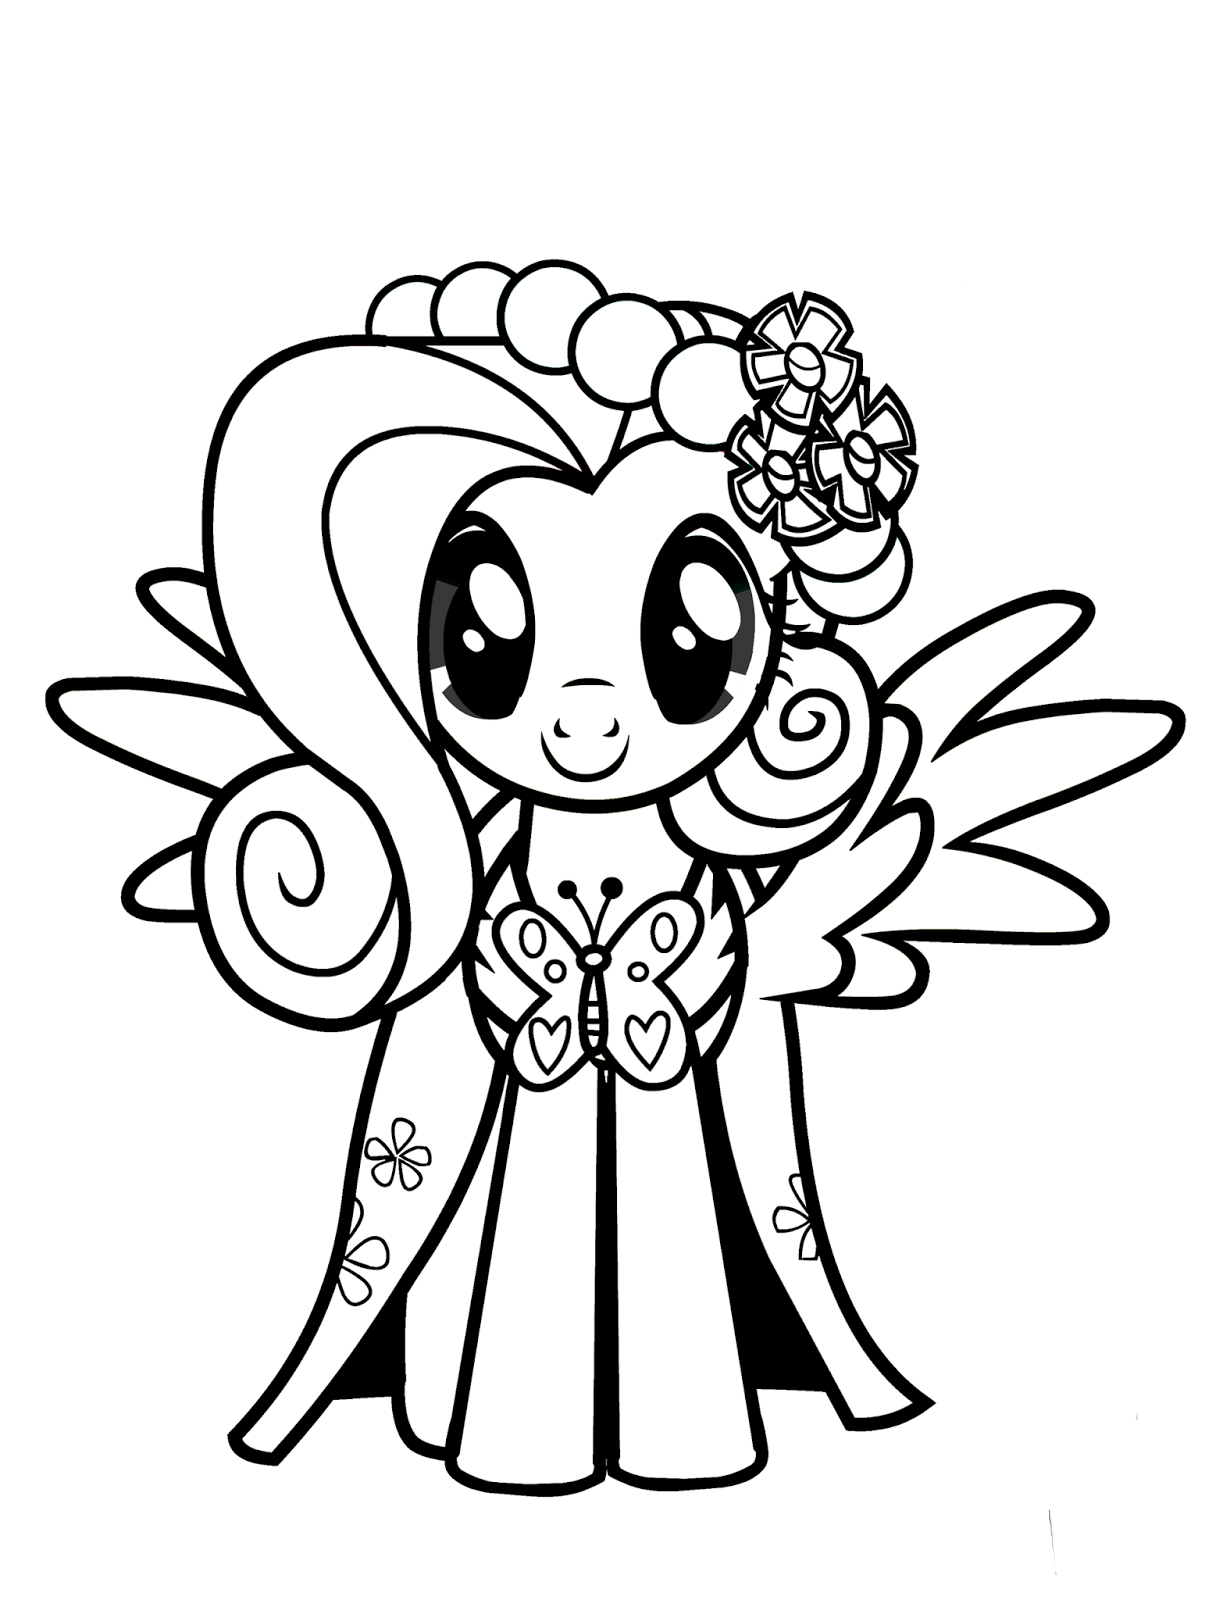 990 Top My Little Pony Movie Free Coloring Pages Download Free Images